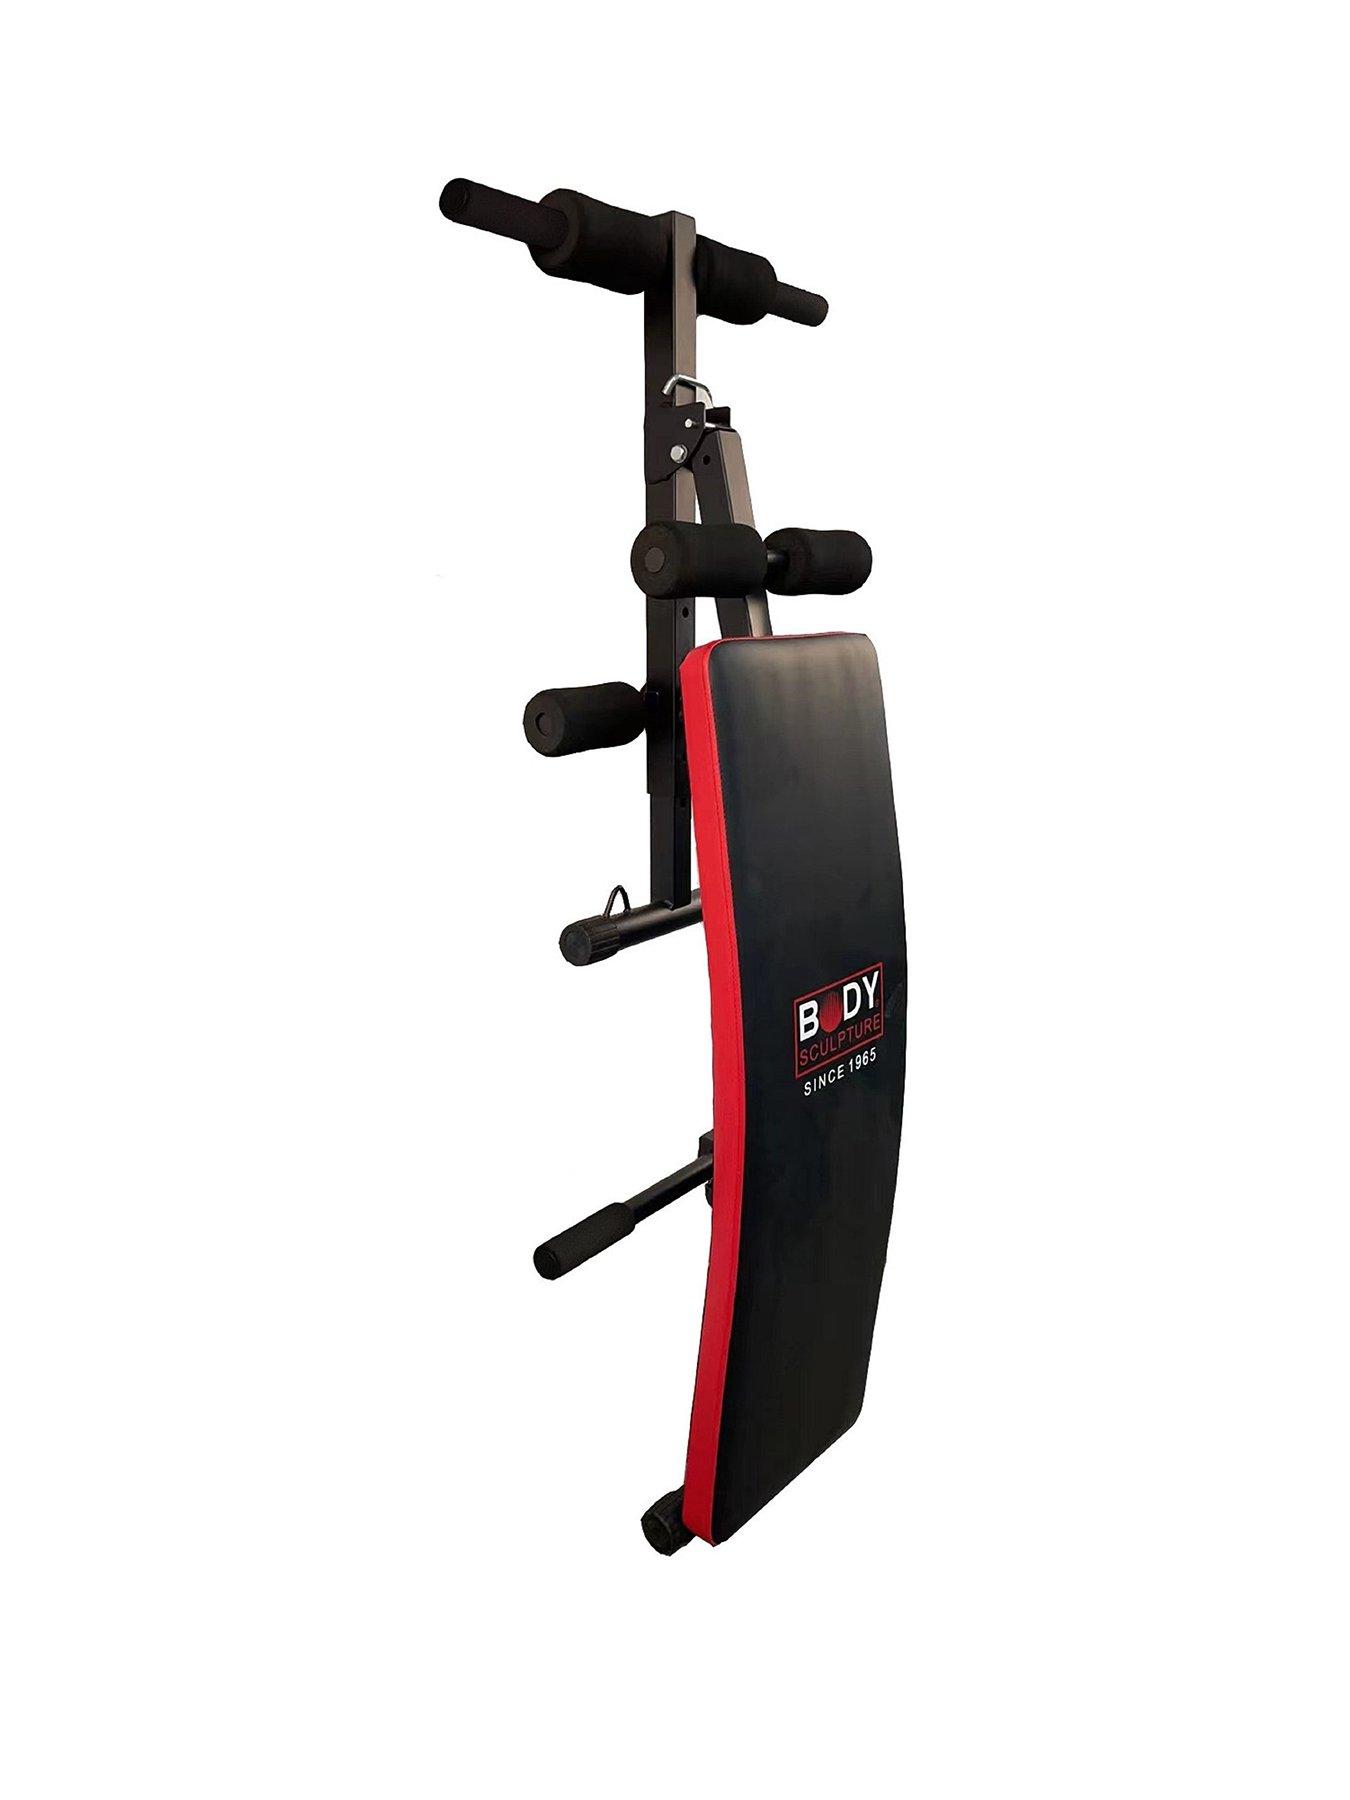 Body Sculpture BSB510 Abdominal Sit-Up Bench, Adjustable Incline, Foldable, Padded, Push Up Bars